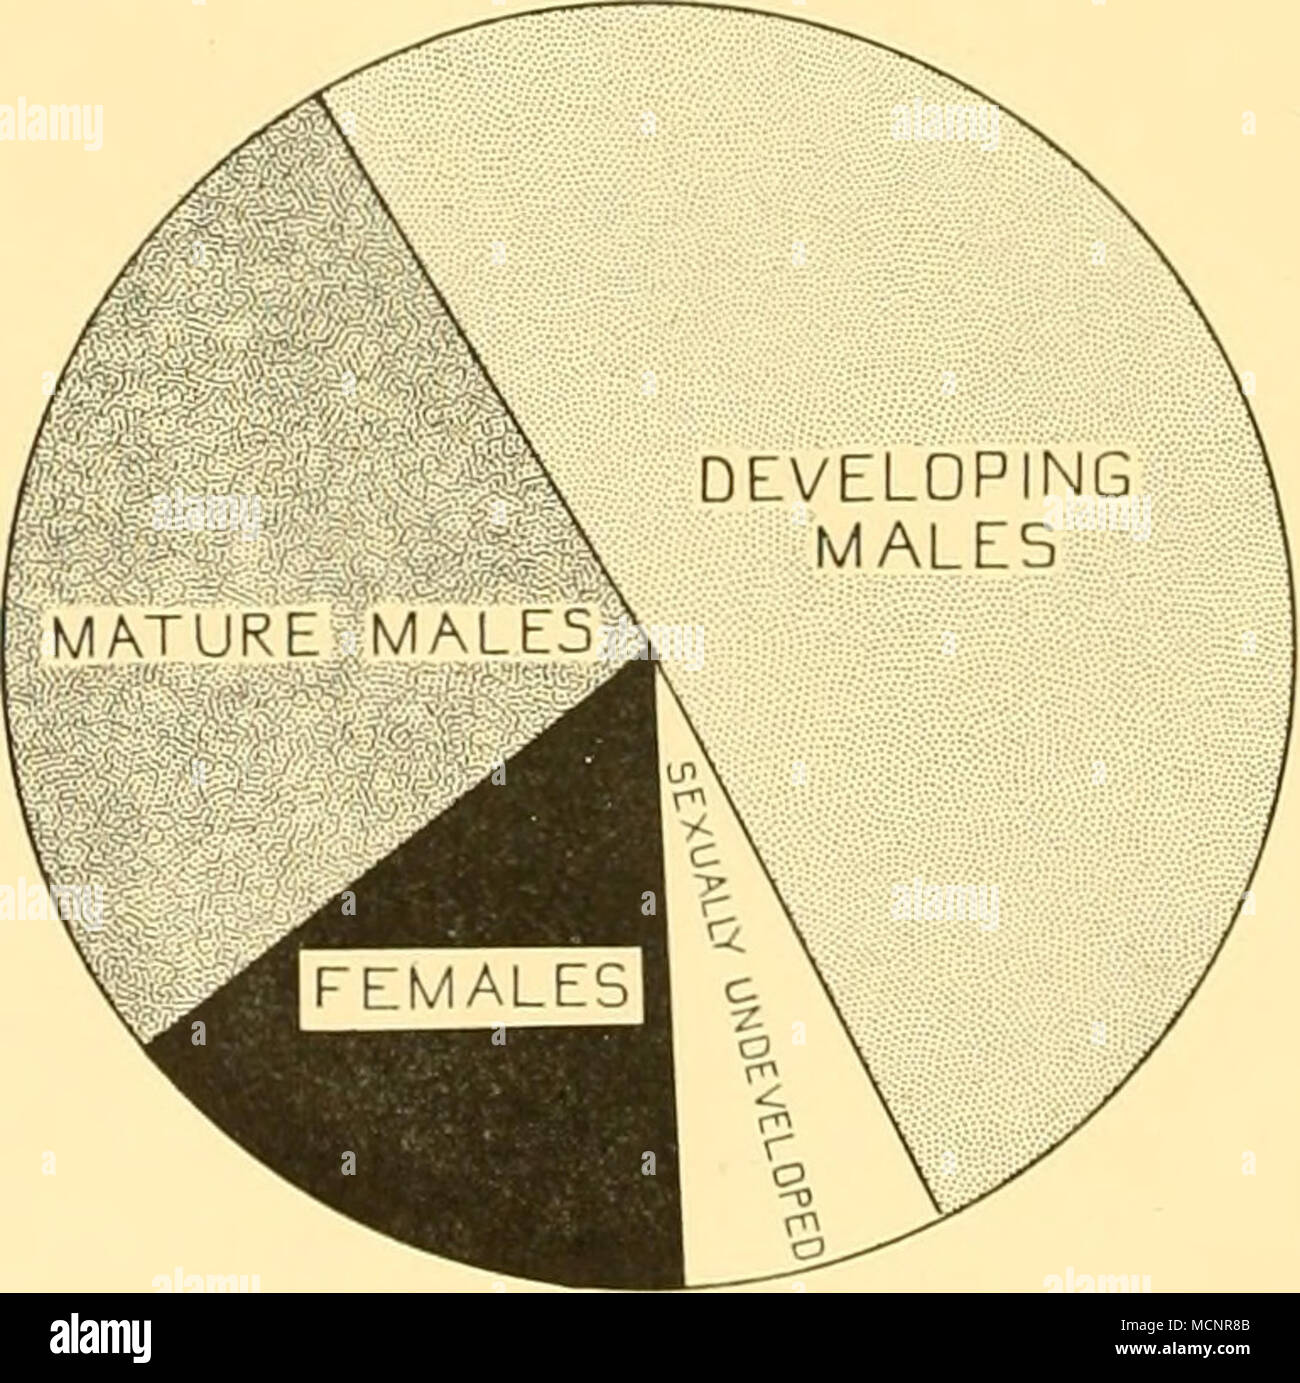 . Fig. n. Limacina bulimoides. March population at WS 996 and WS 997. Diagram showing the distribution of pure females, mature males, developing males and sexually undifferentiated individuals in the whole March population. Stock Photo